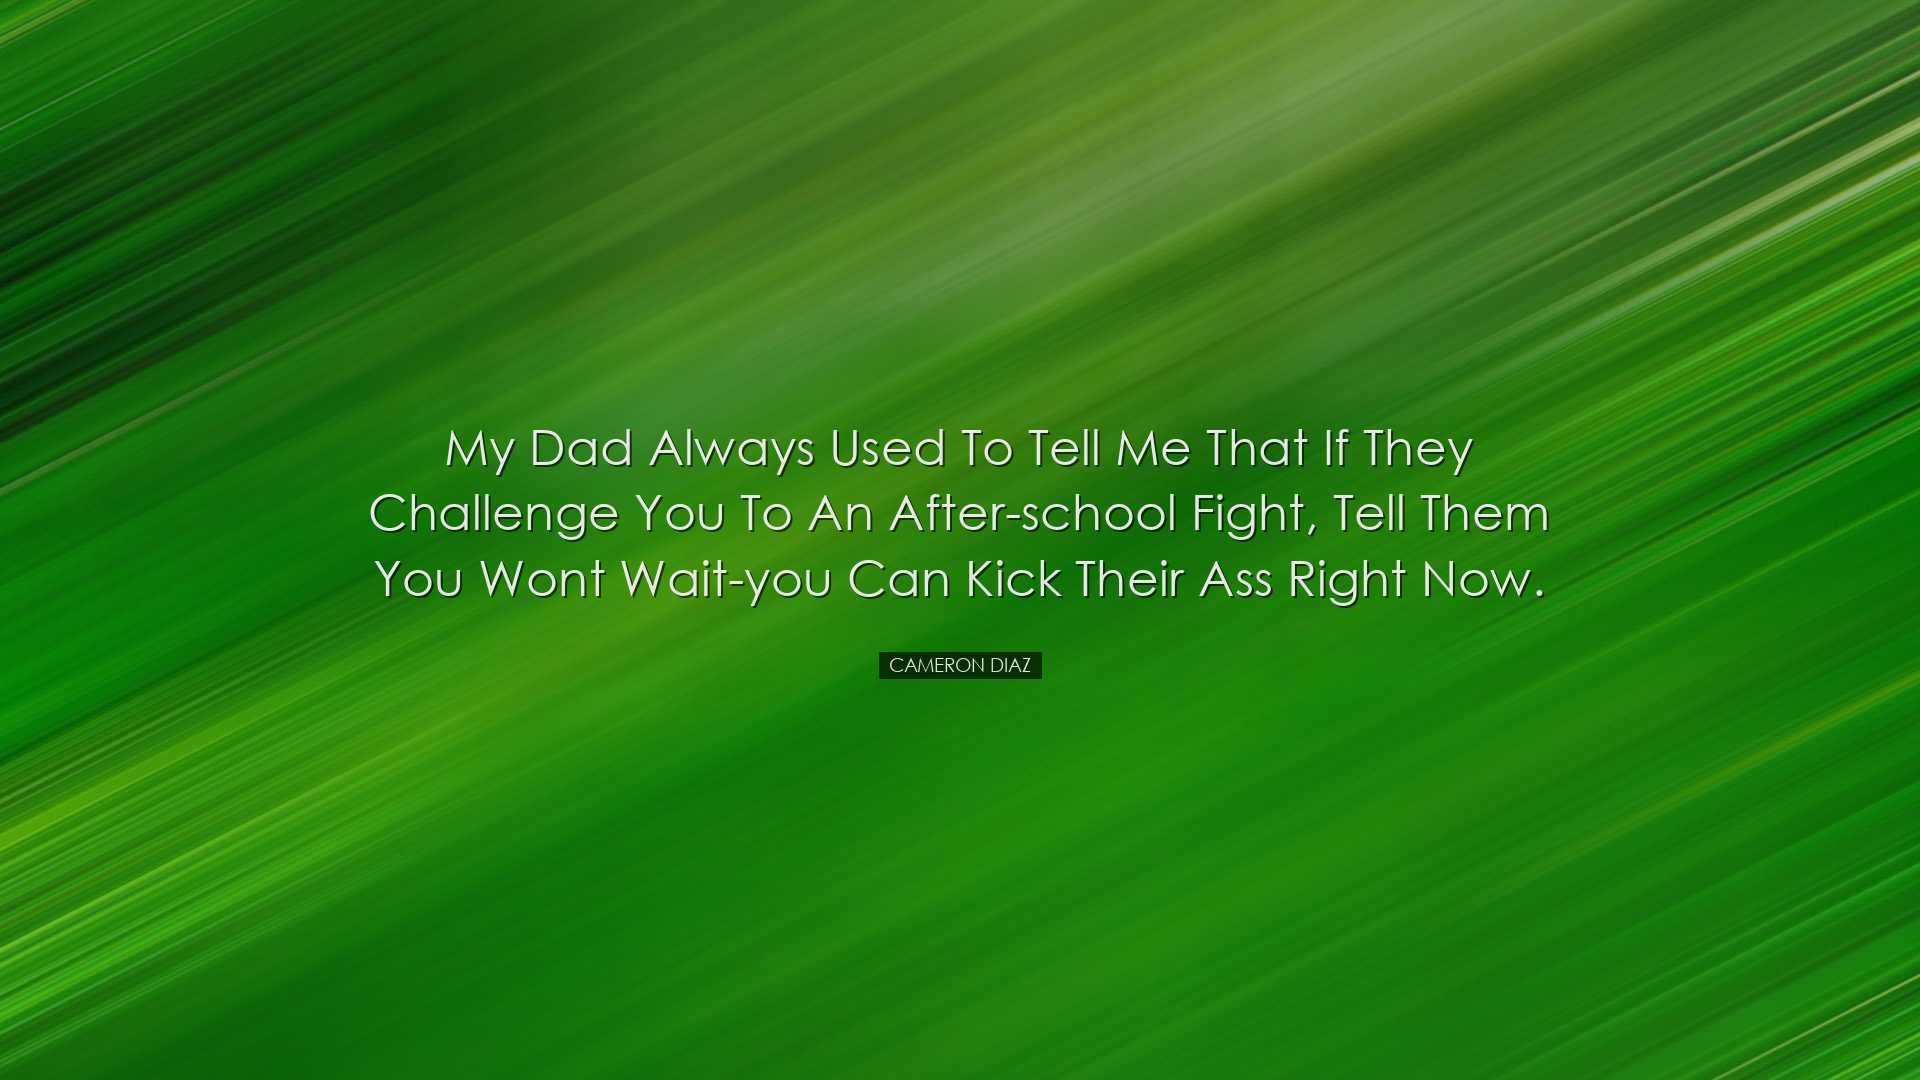 My dad always used to tell me that if they challenge you to an aft